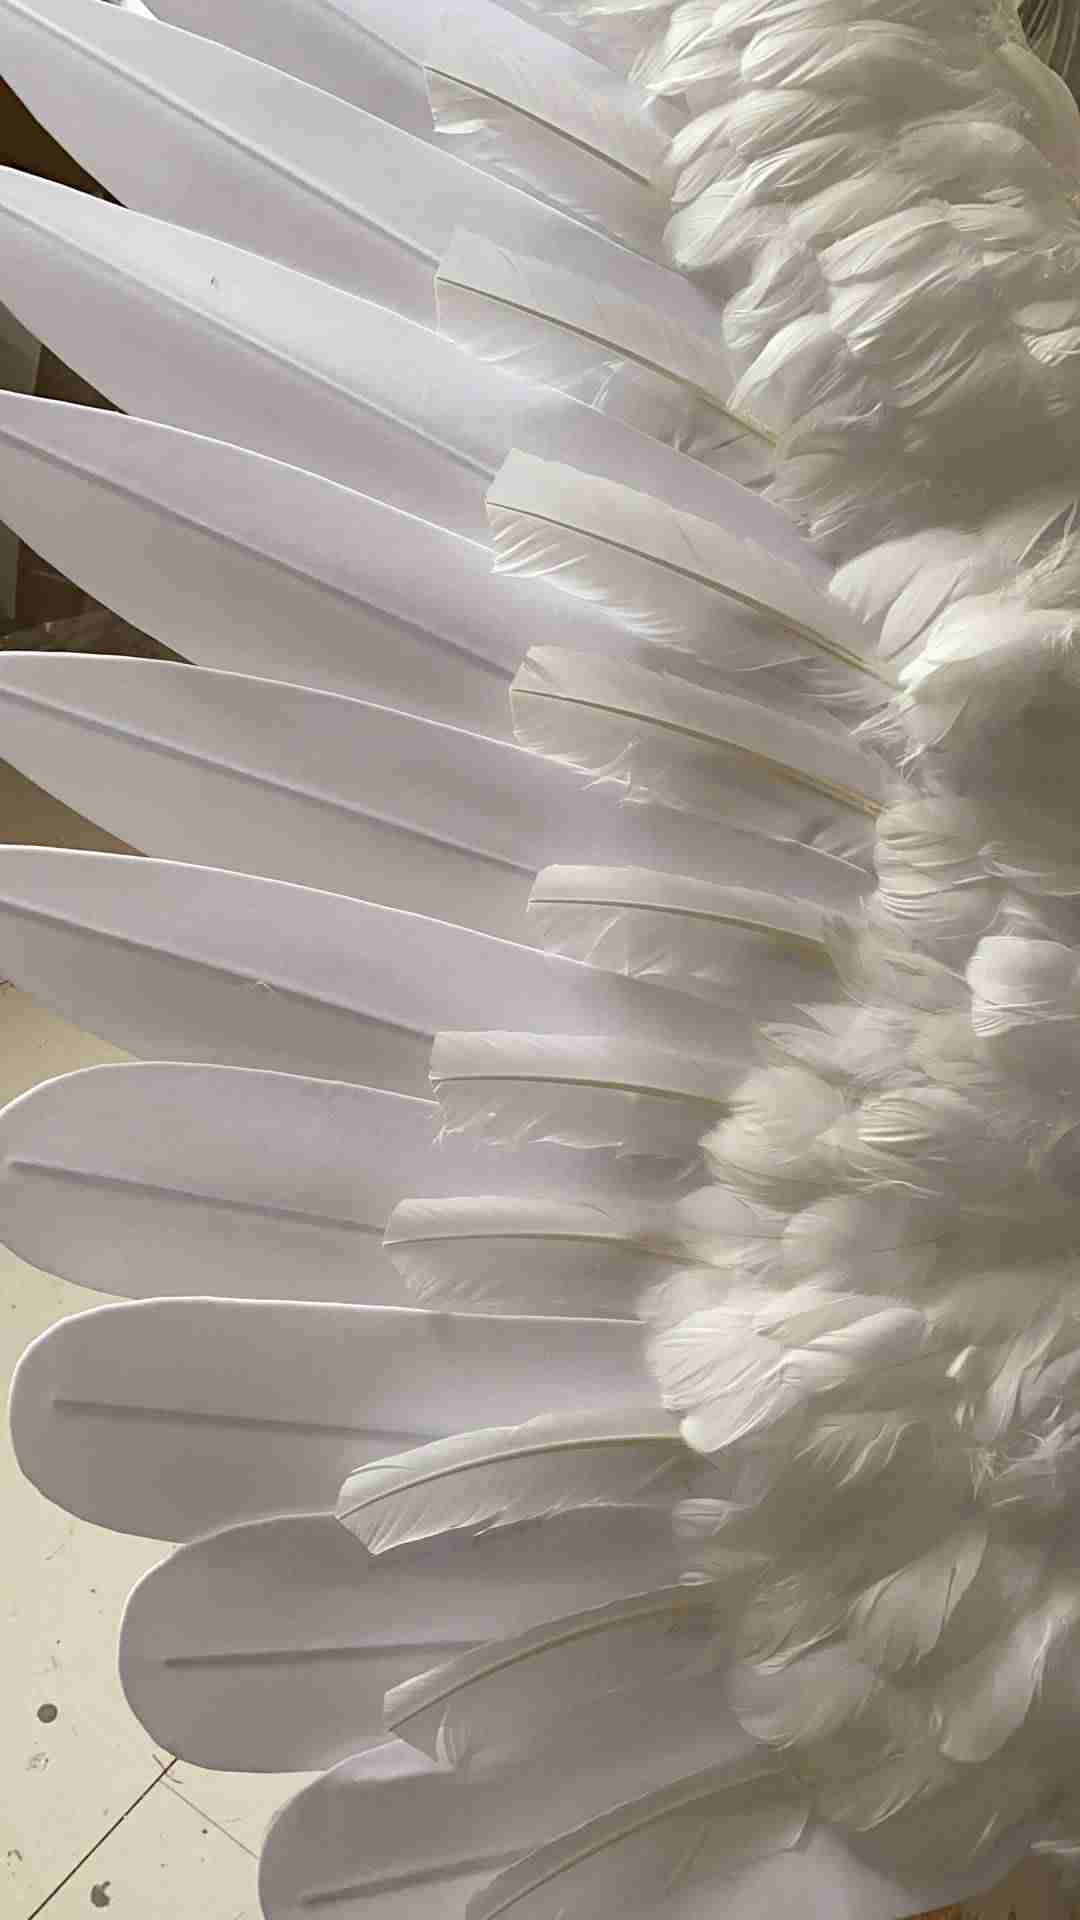 Our large white color angel wings feathers. Wings are moveable and can control extension and folding remotely. Made from flannel cloth and goose feathers. Wings for angel costume or devil costume. Suitable for fantasy photoshoots or events.